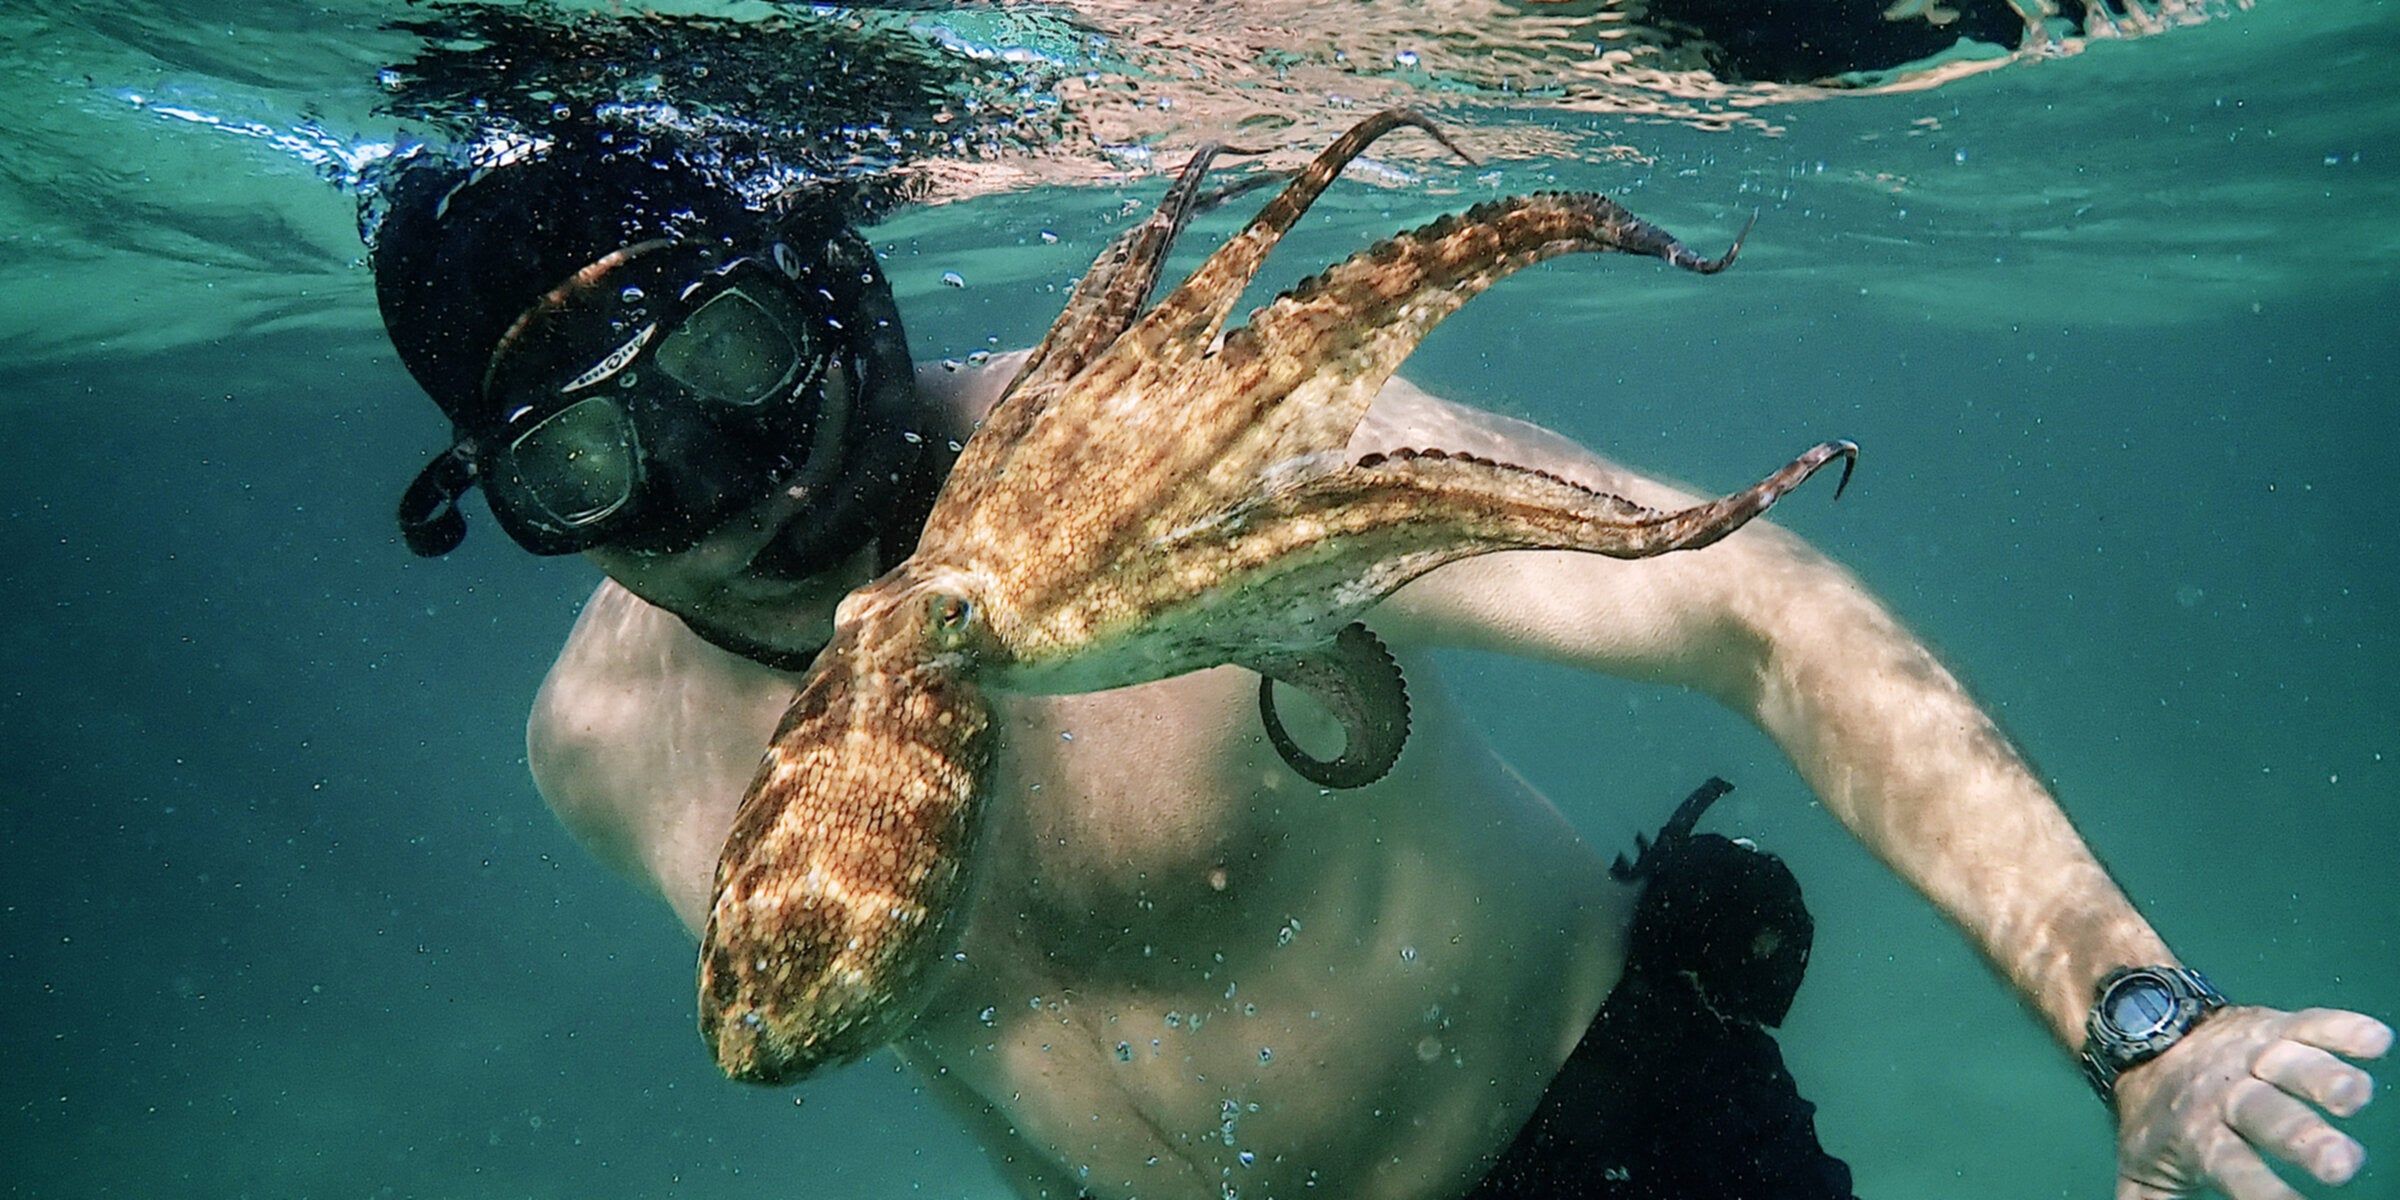 Craig Foster snorkeling with the young octopus